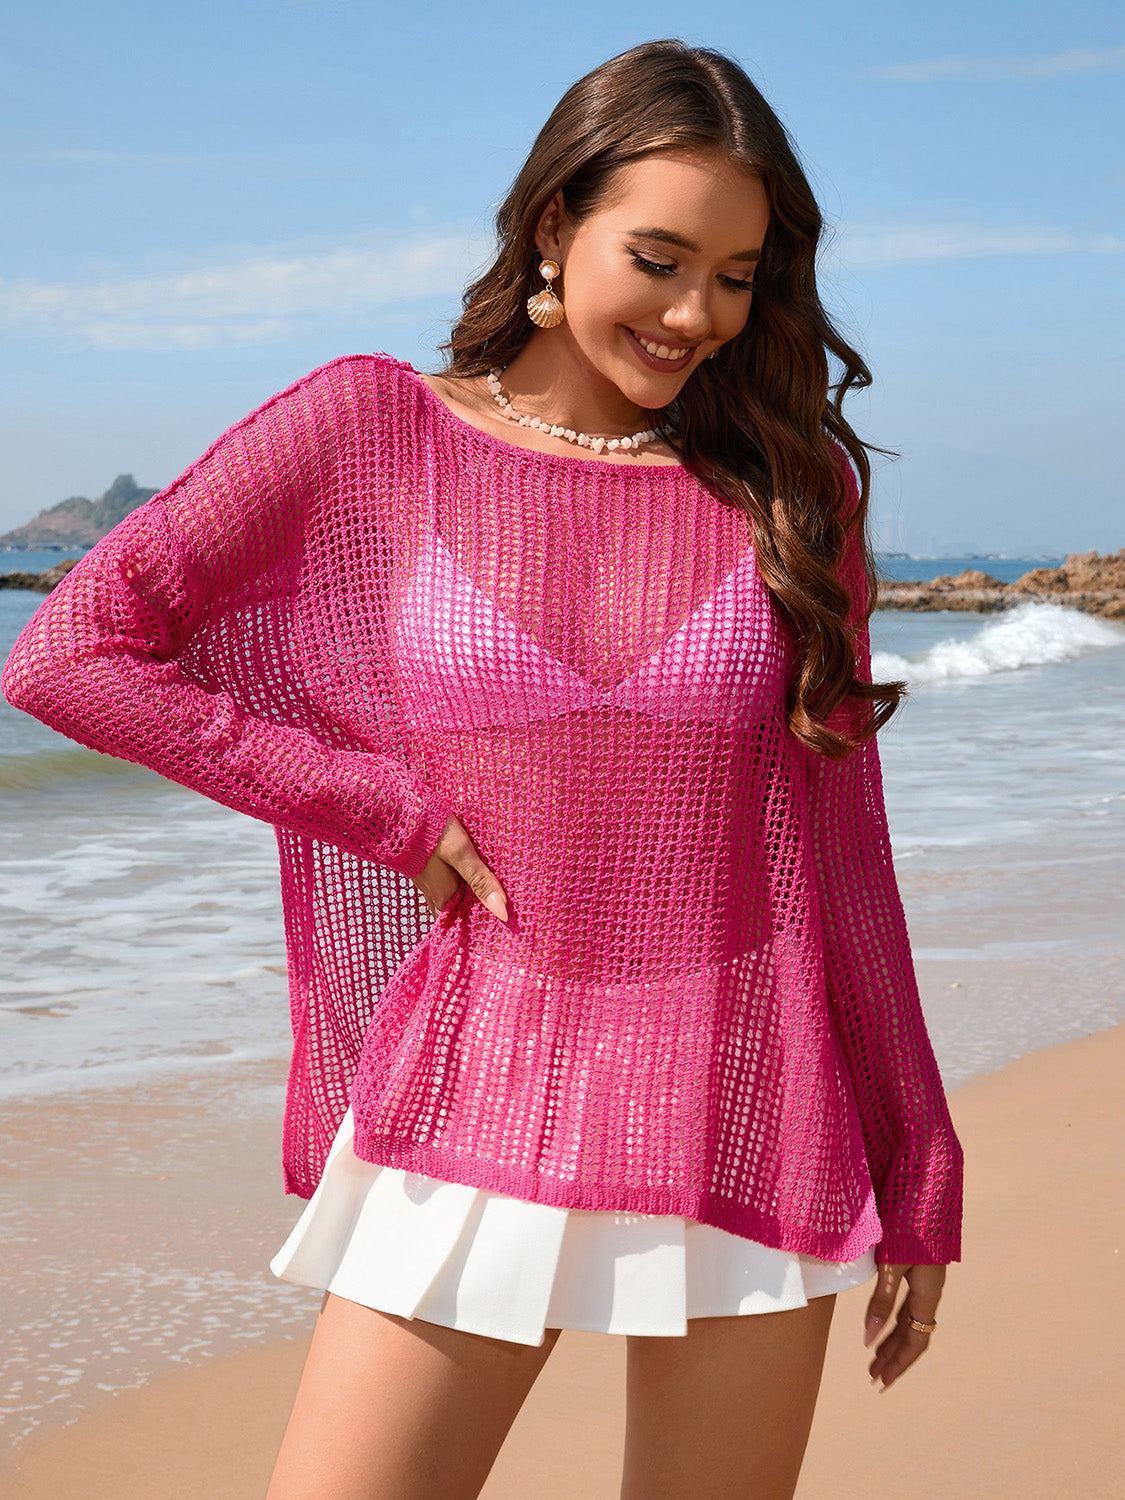 Sunset Vacation  Openwork Slit Boat Neck Long Sleeve Cover-Up  Sunset and Swim   